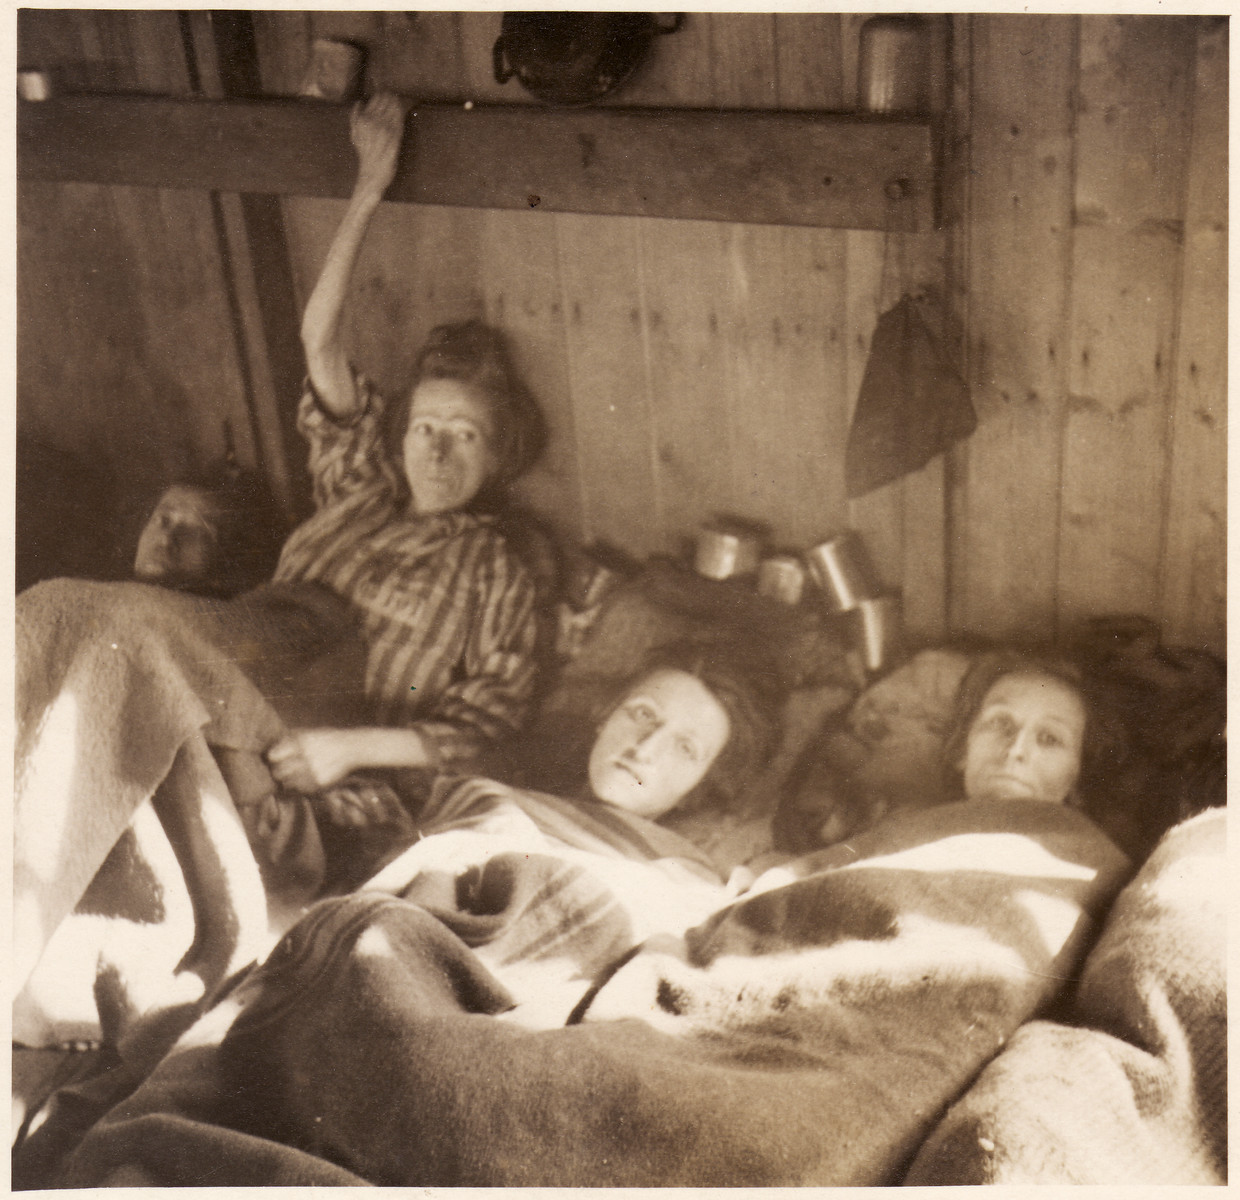 Female survivors lie in bunks inside the barracks of the Bergen-Belsen concentration camp.

Among those pictured (center) is Berthe Berkowitz (later Lautman).